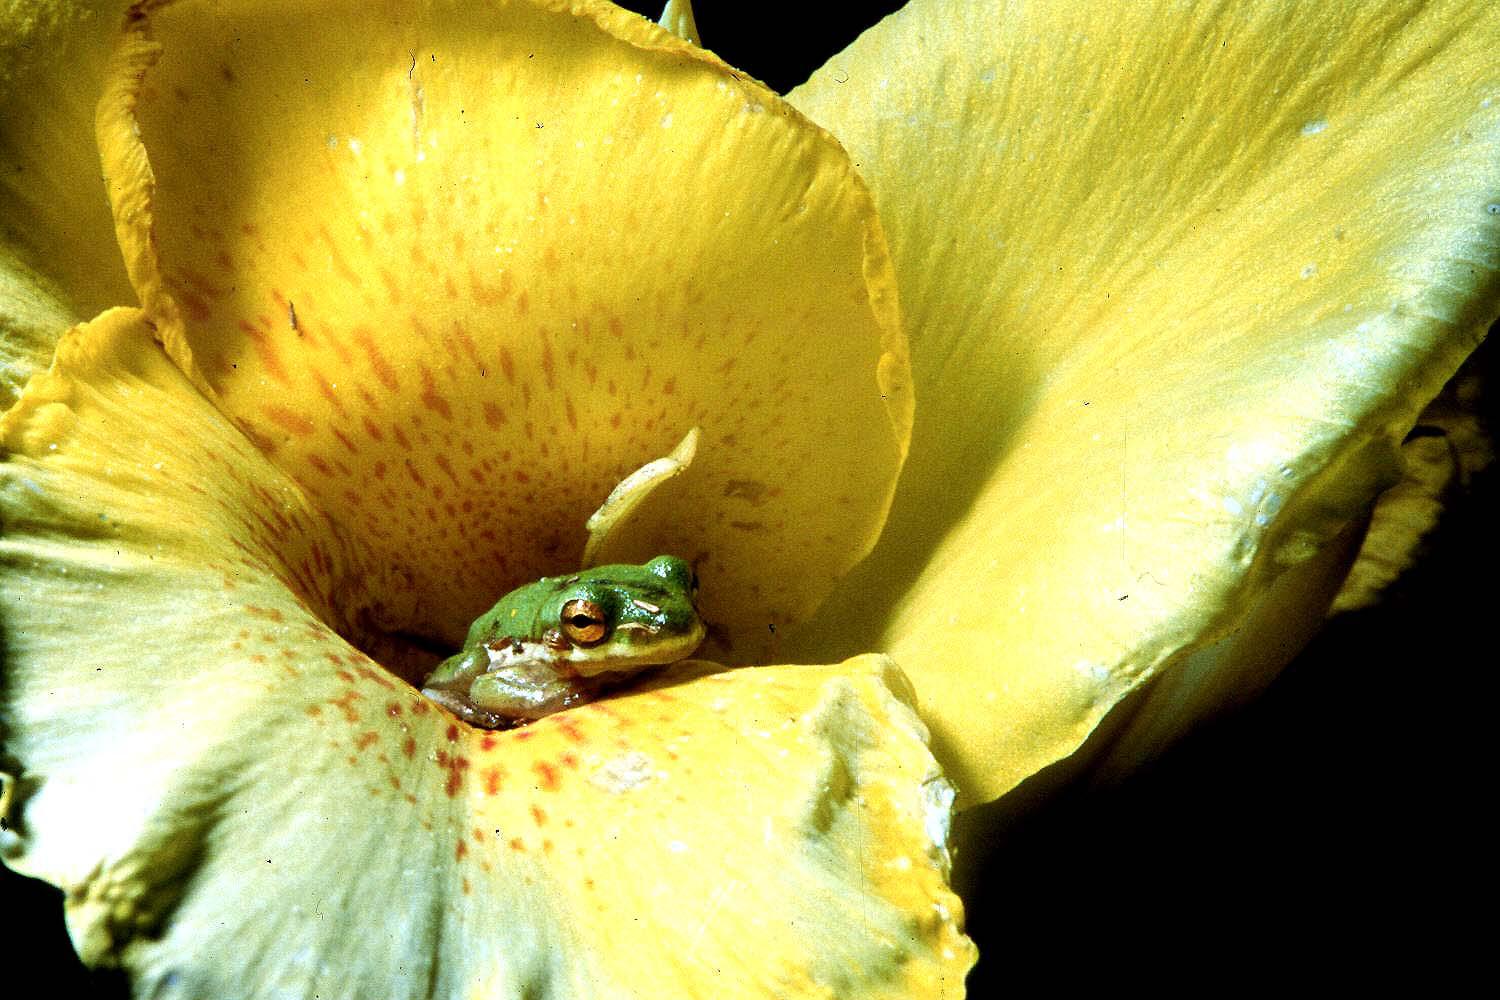 If you step outside this evening and listen, you will hear one of the most wonderful songs in nature, a nighttime melody coming from the green tree frogs.